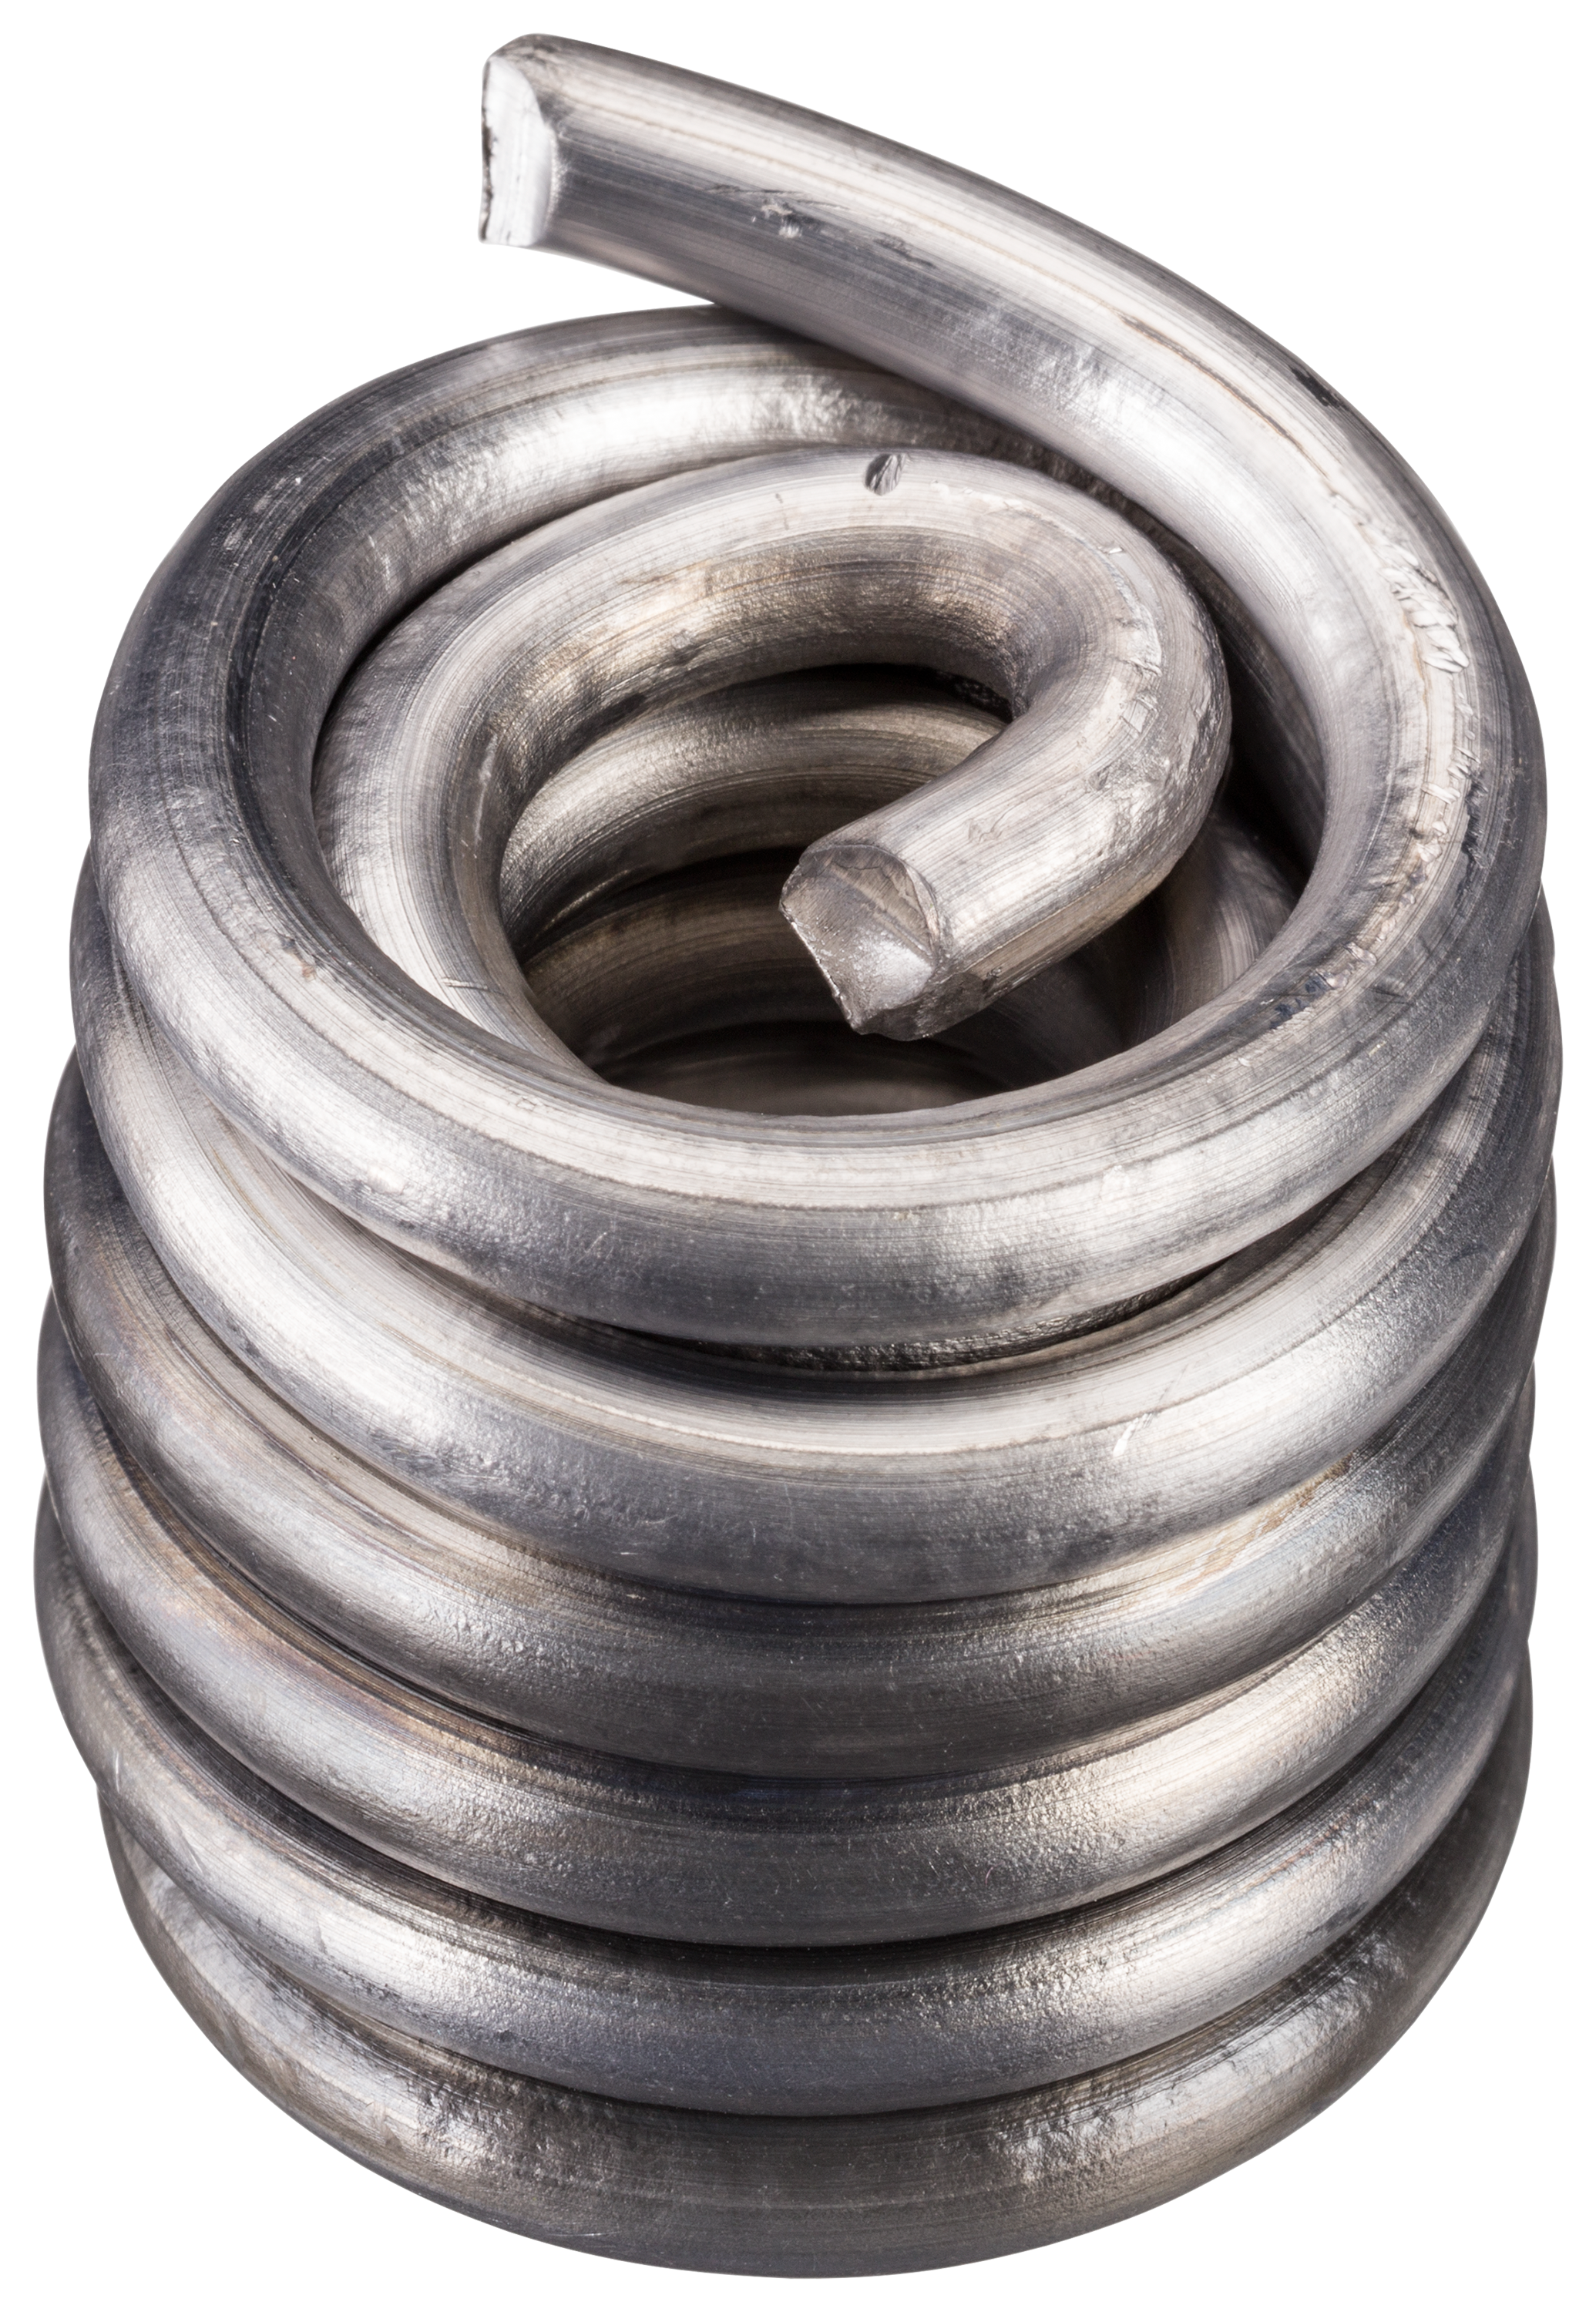 Bullet Weights Hollow Core Lead Wire, 1 lb